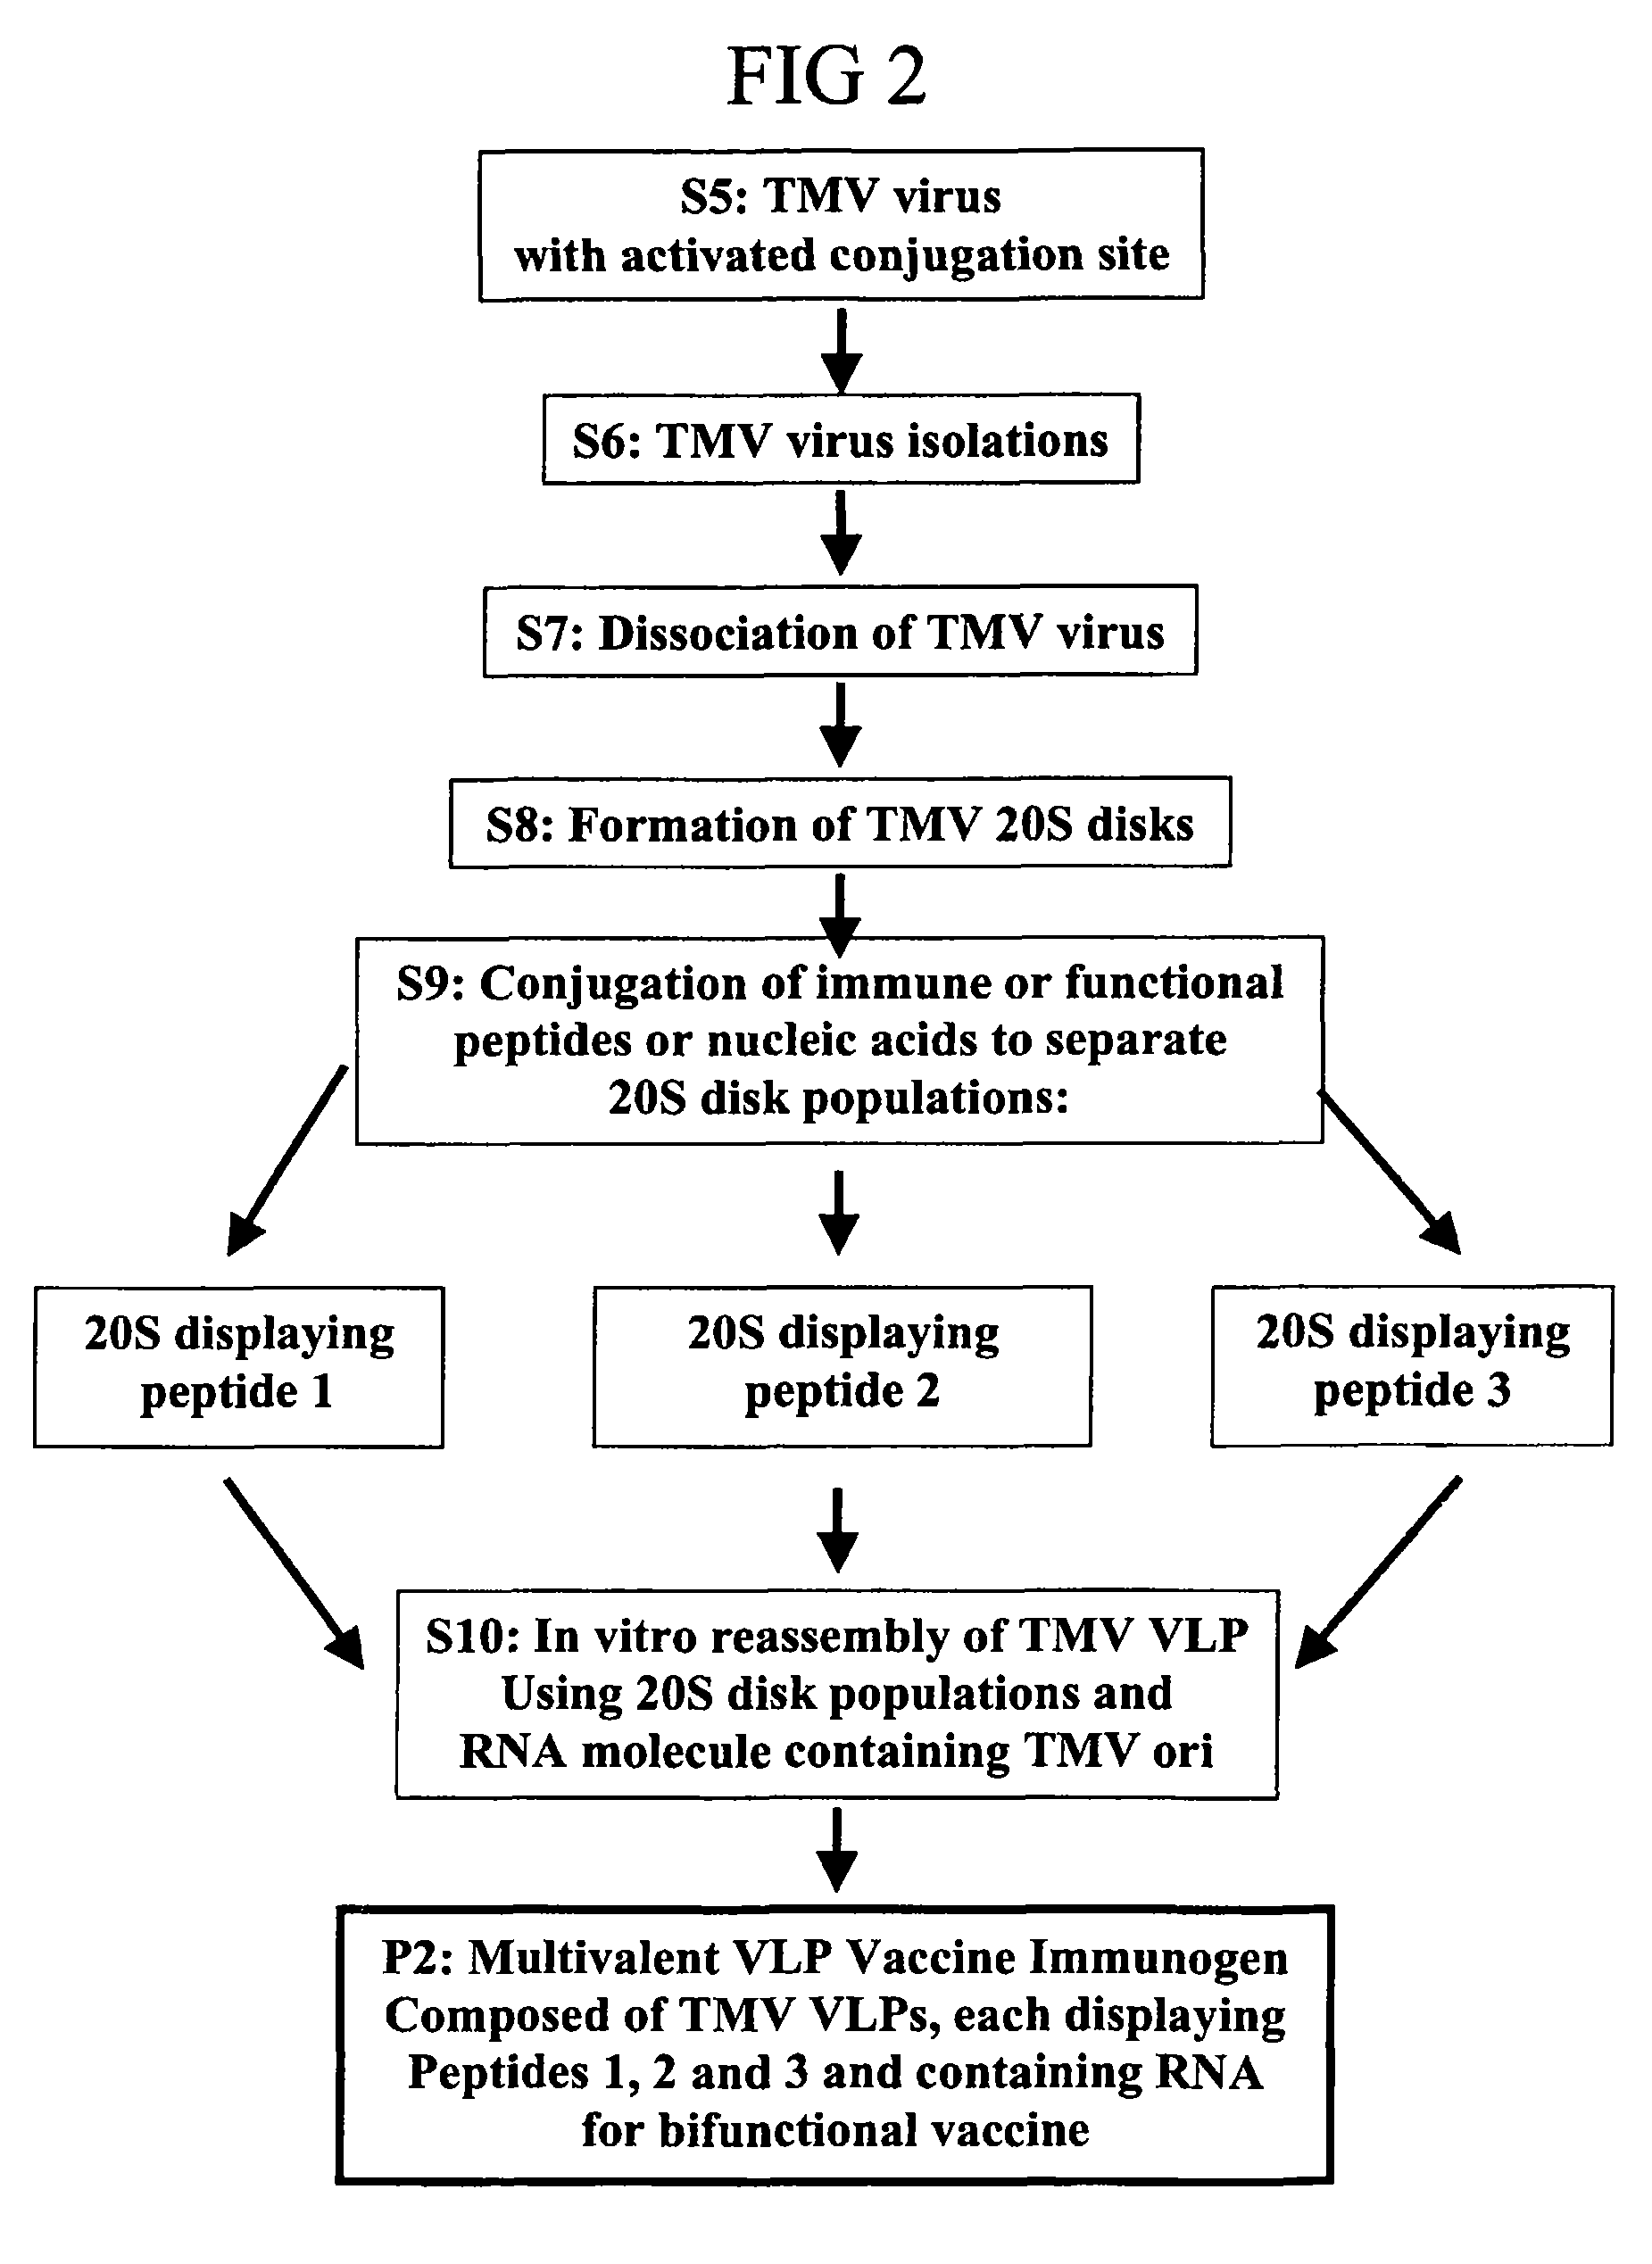 Flexible vaccine assembly and vaccine delivery platform